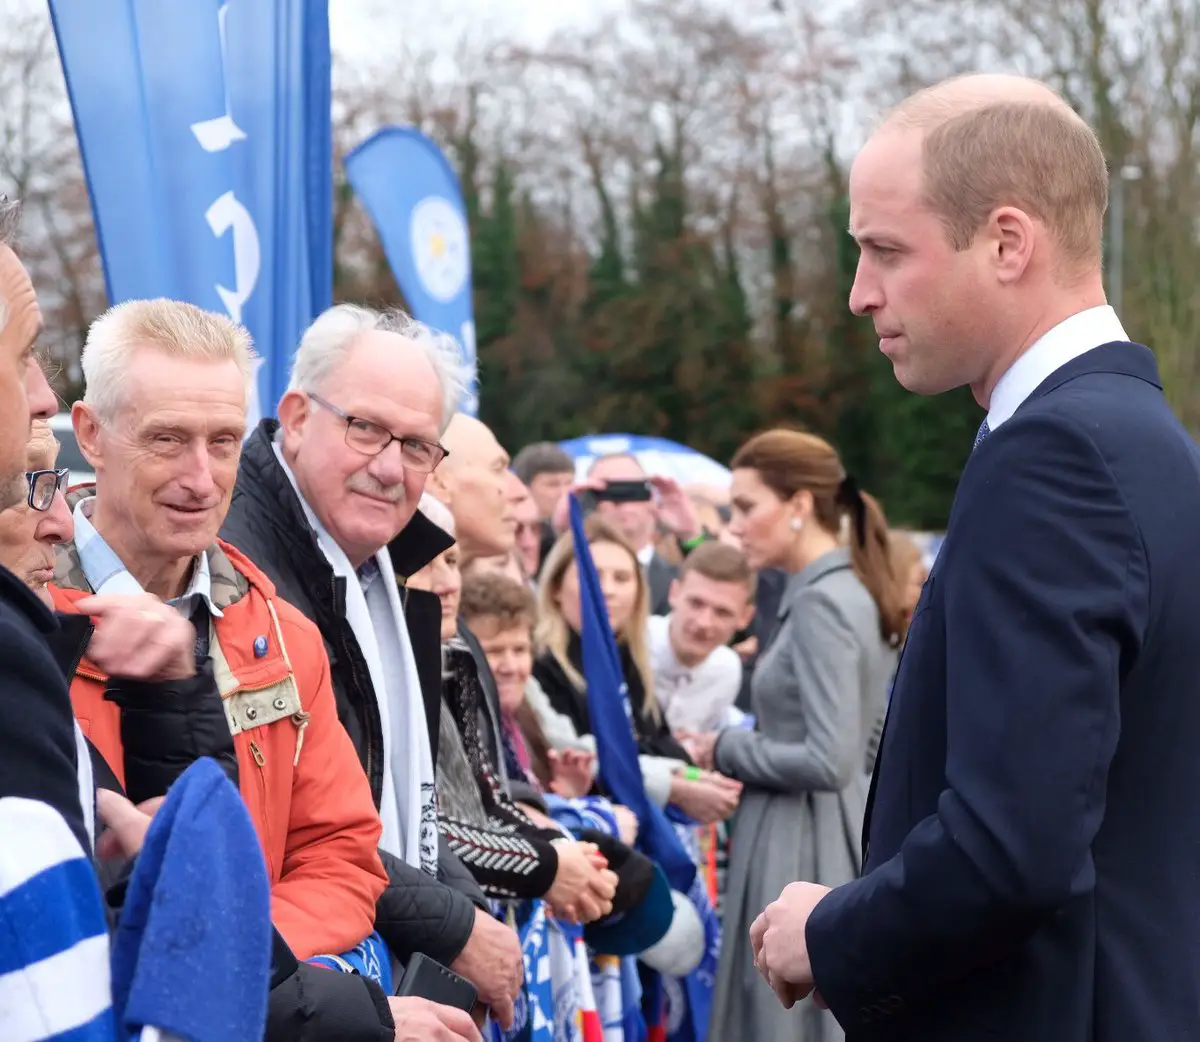 Duke and Duchess of Cambridge paid tribute to Leicester helicopter crash victims